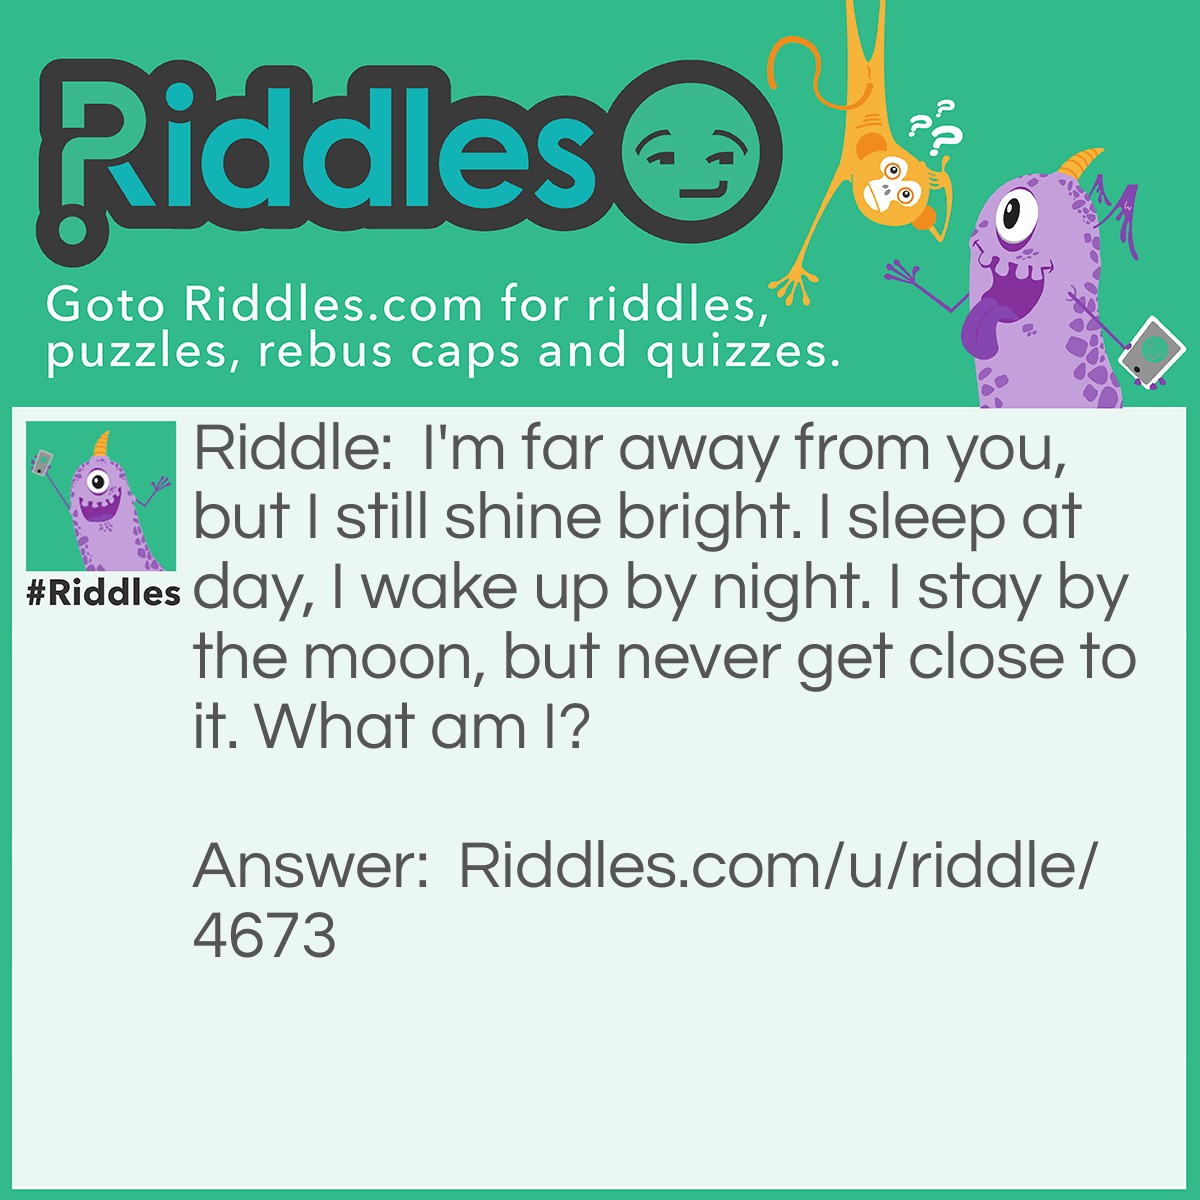 Riddle: I'm far away from you, but I still shine bright. I sleep at day, I wake up by night. I stay by the moon, but never get close to it. What am I? Answer: A star.